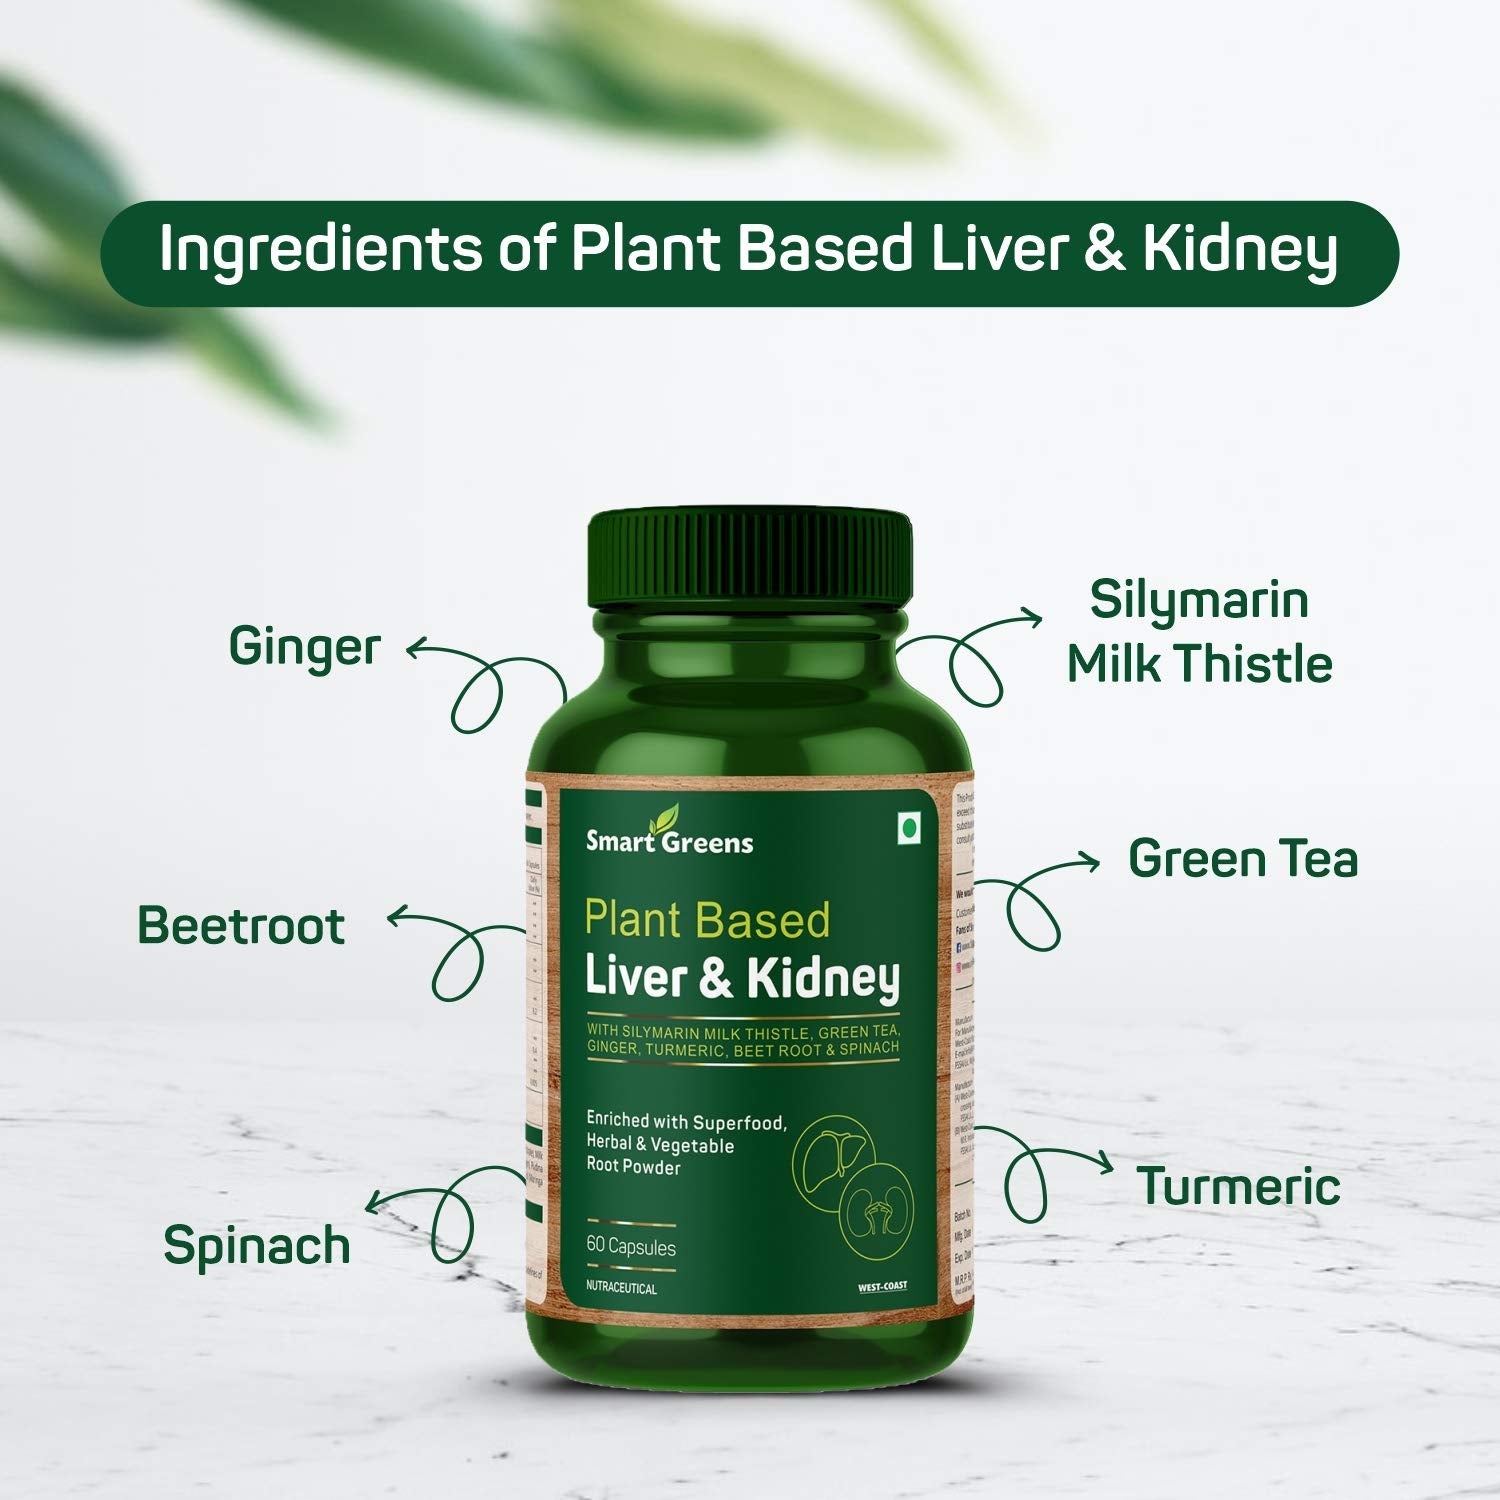 Smart Greens Plant Based Liver & Kidney Enriched with Silymarin Milk Thistle, Green Tea, Ginger, Turmeric, Beetroot & Spinach ‚Äì 60 Capsules